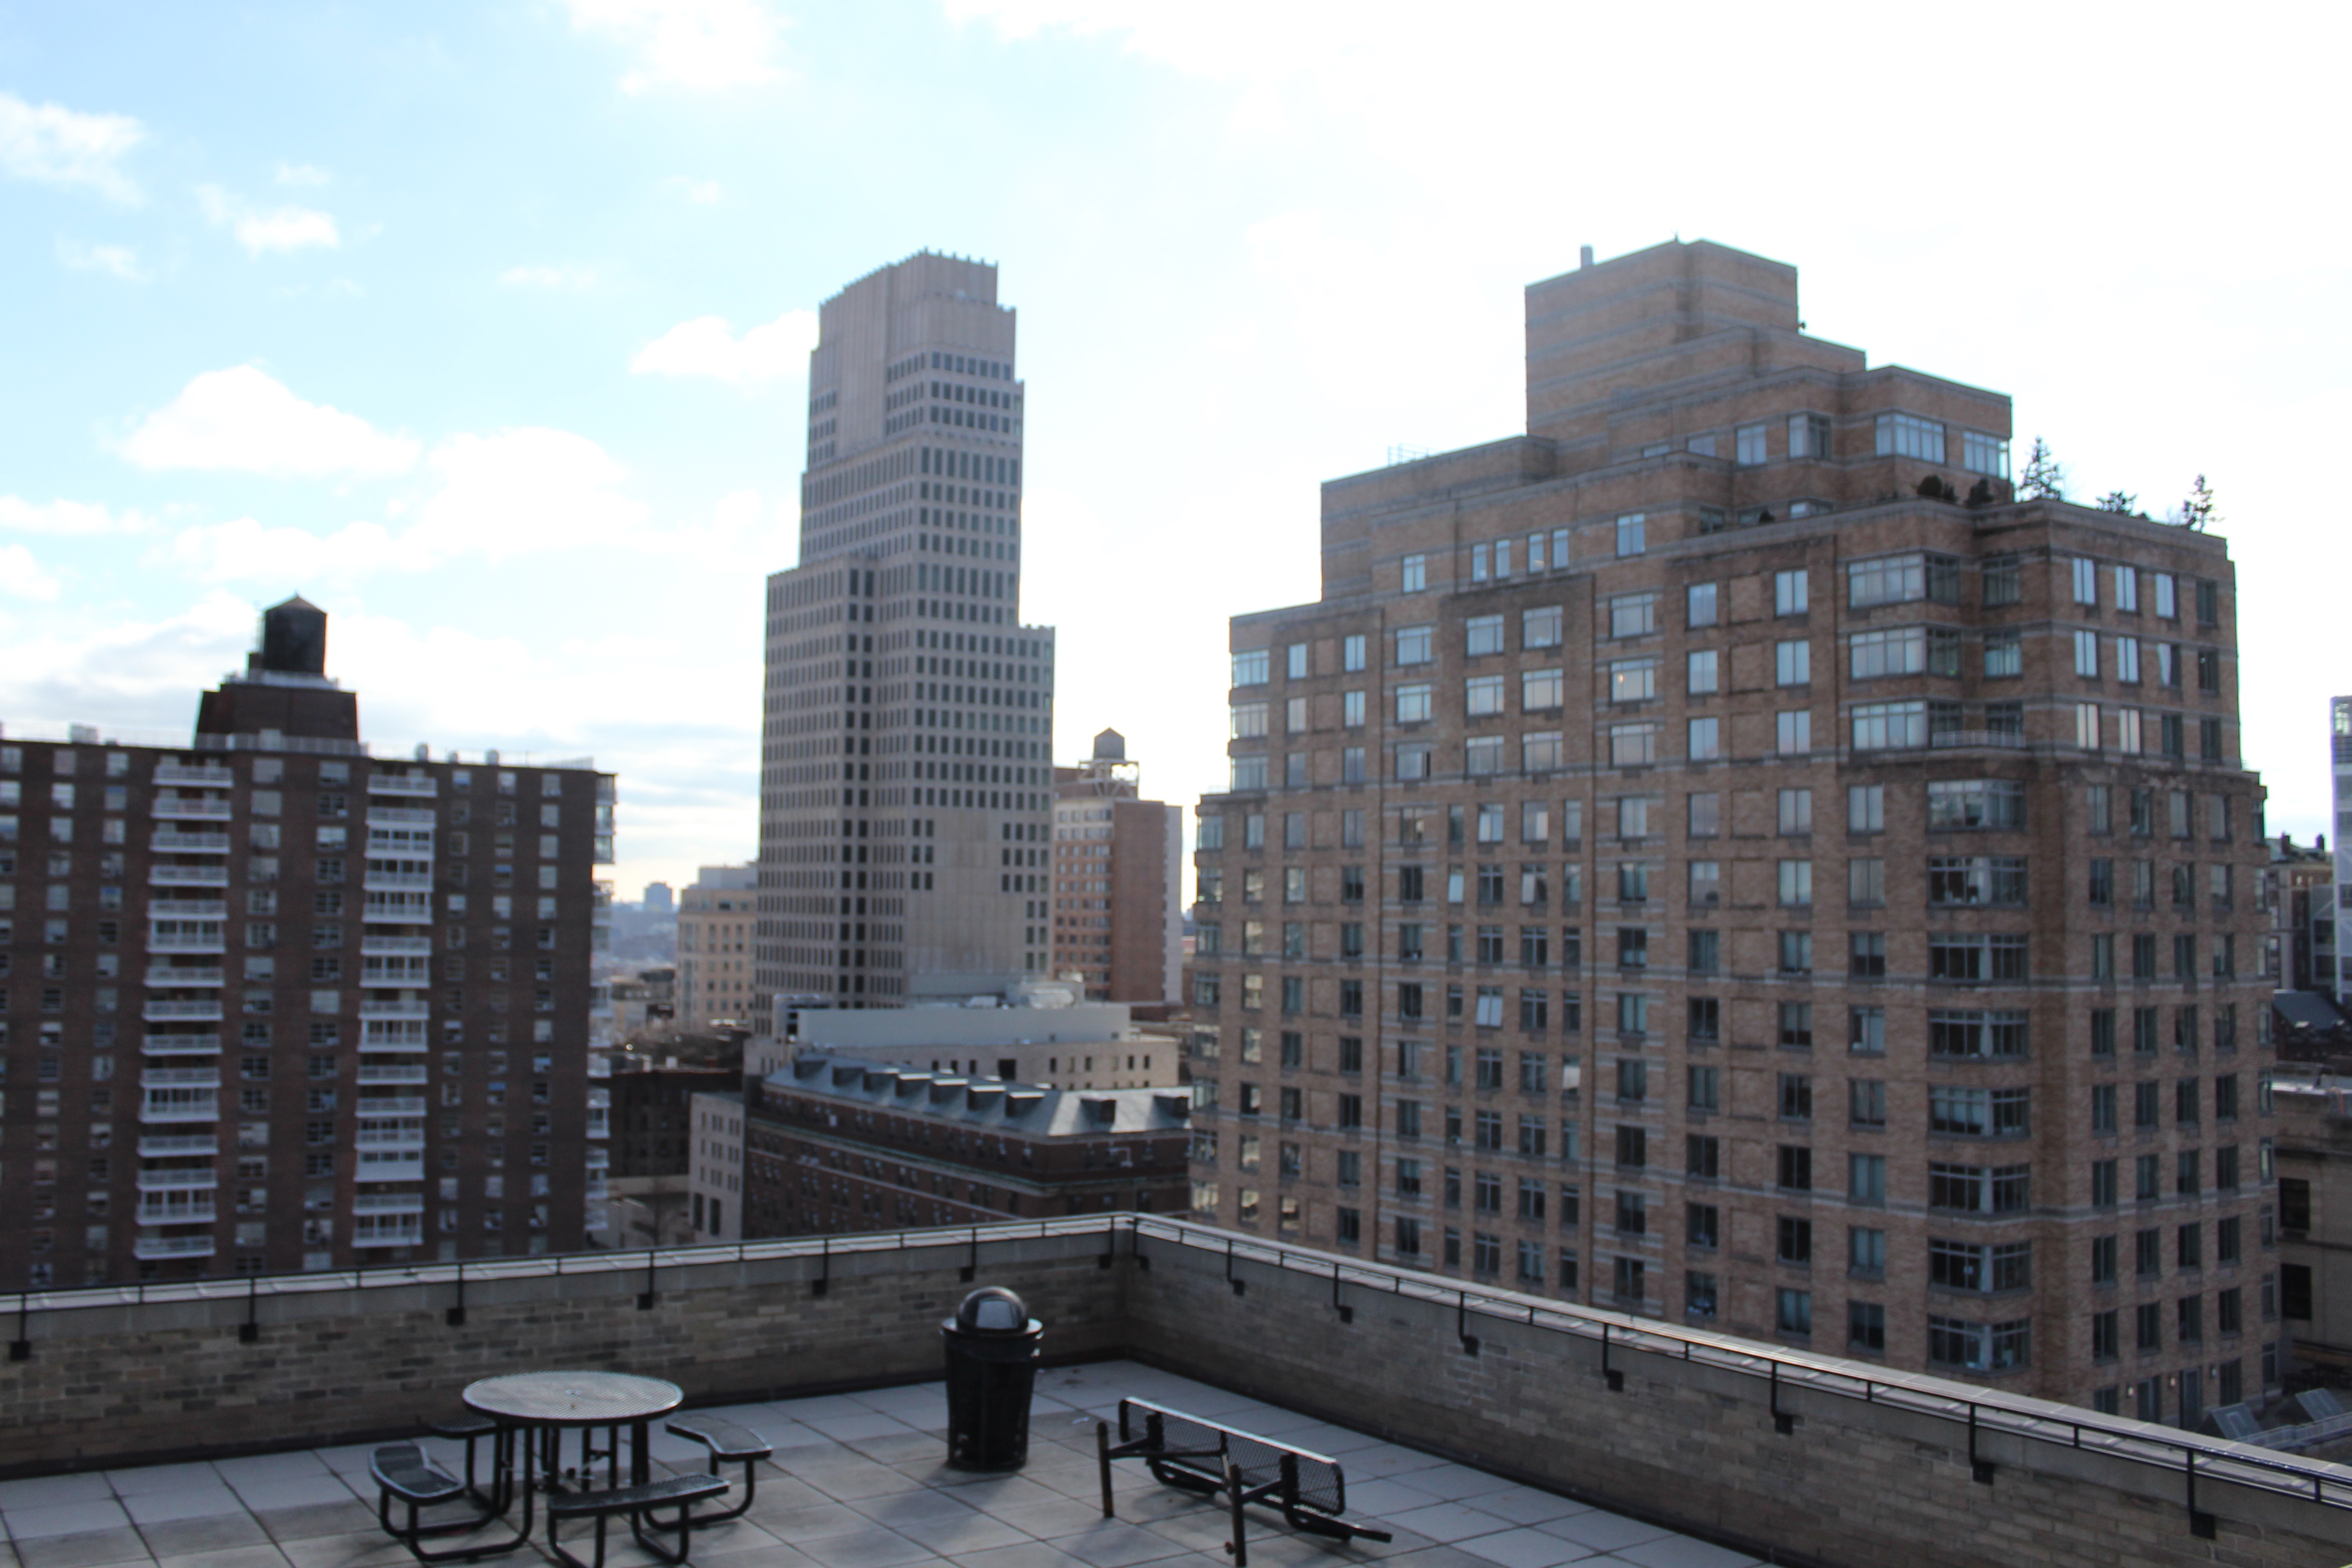 A view of NYC buildings from a terrace.